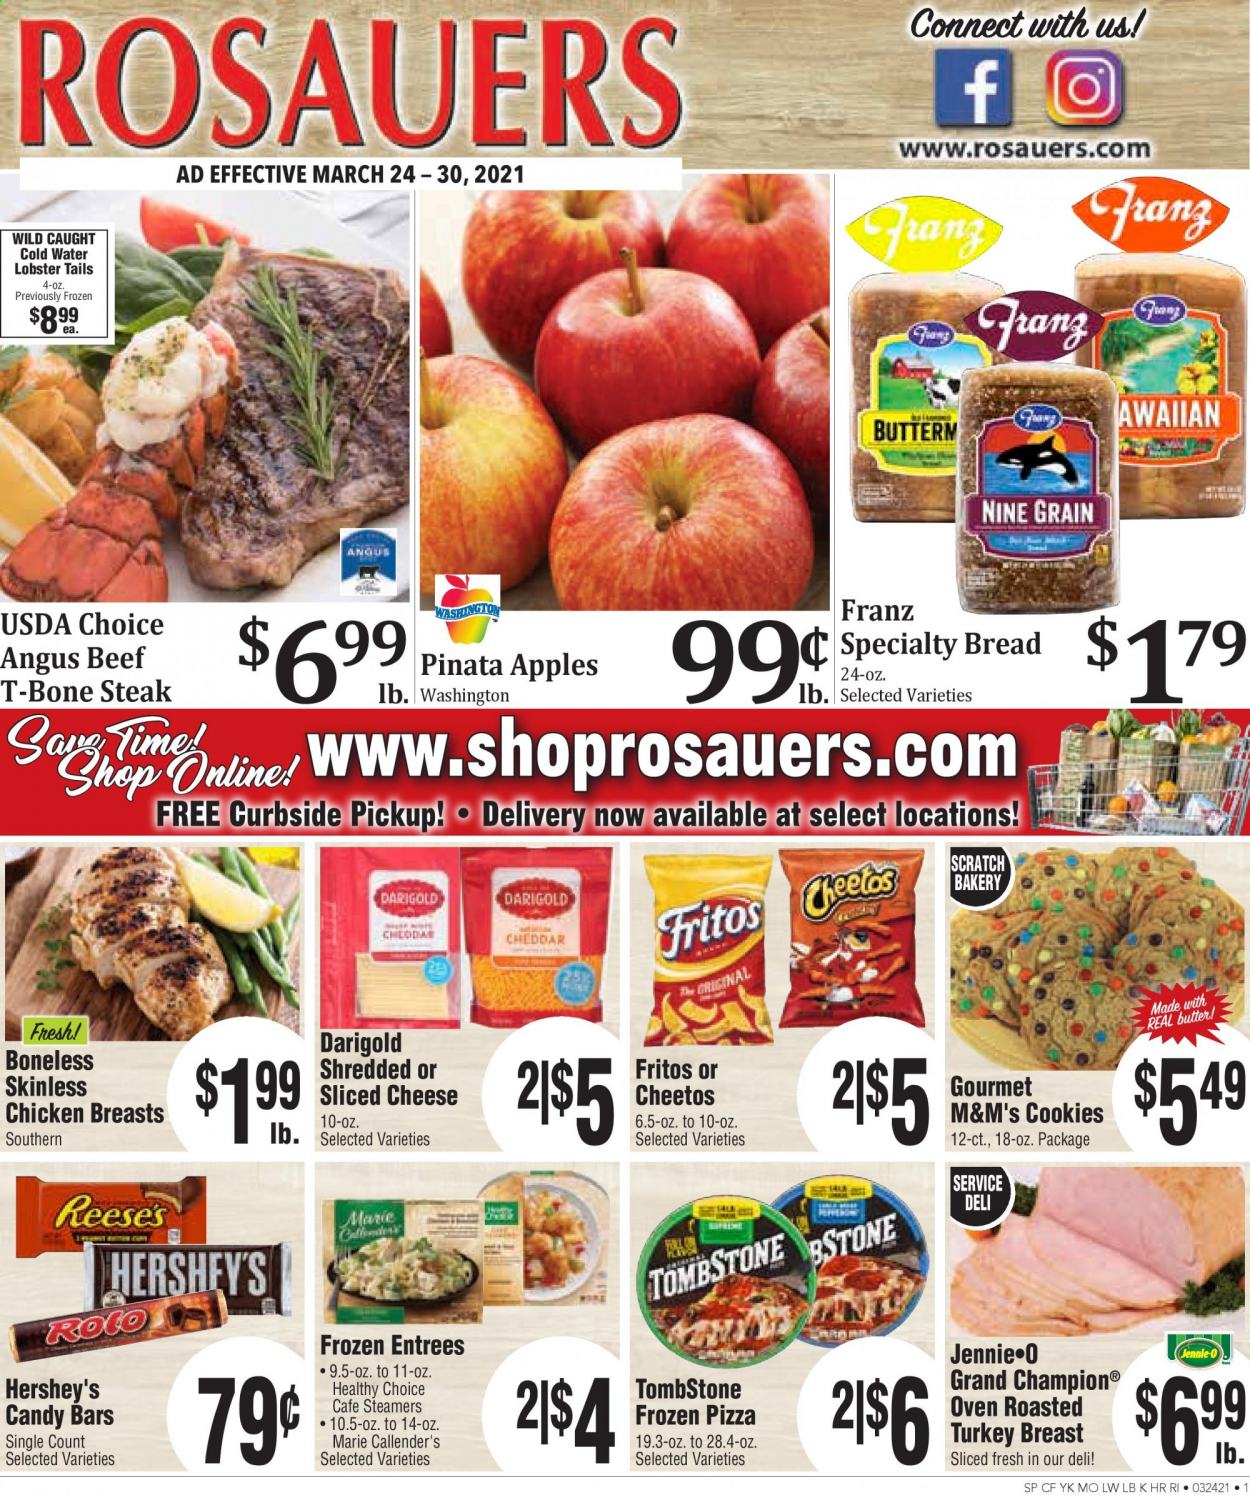 thumbnail - Rosauers Flyer - 03/24/2021 - 03/30/2021 - Sales products - bread, apples, lobster, lobster tail, pizza, Healthy Choice, Marie Callender's, sliced cheese, cheddar, cheese, butter, Reese's, Hershey's, cookies, M&M's, Cheetos, Fritos, turkey breast, chicken breasts, beef meat, t-bone steak, steak. Page 1.